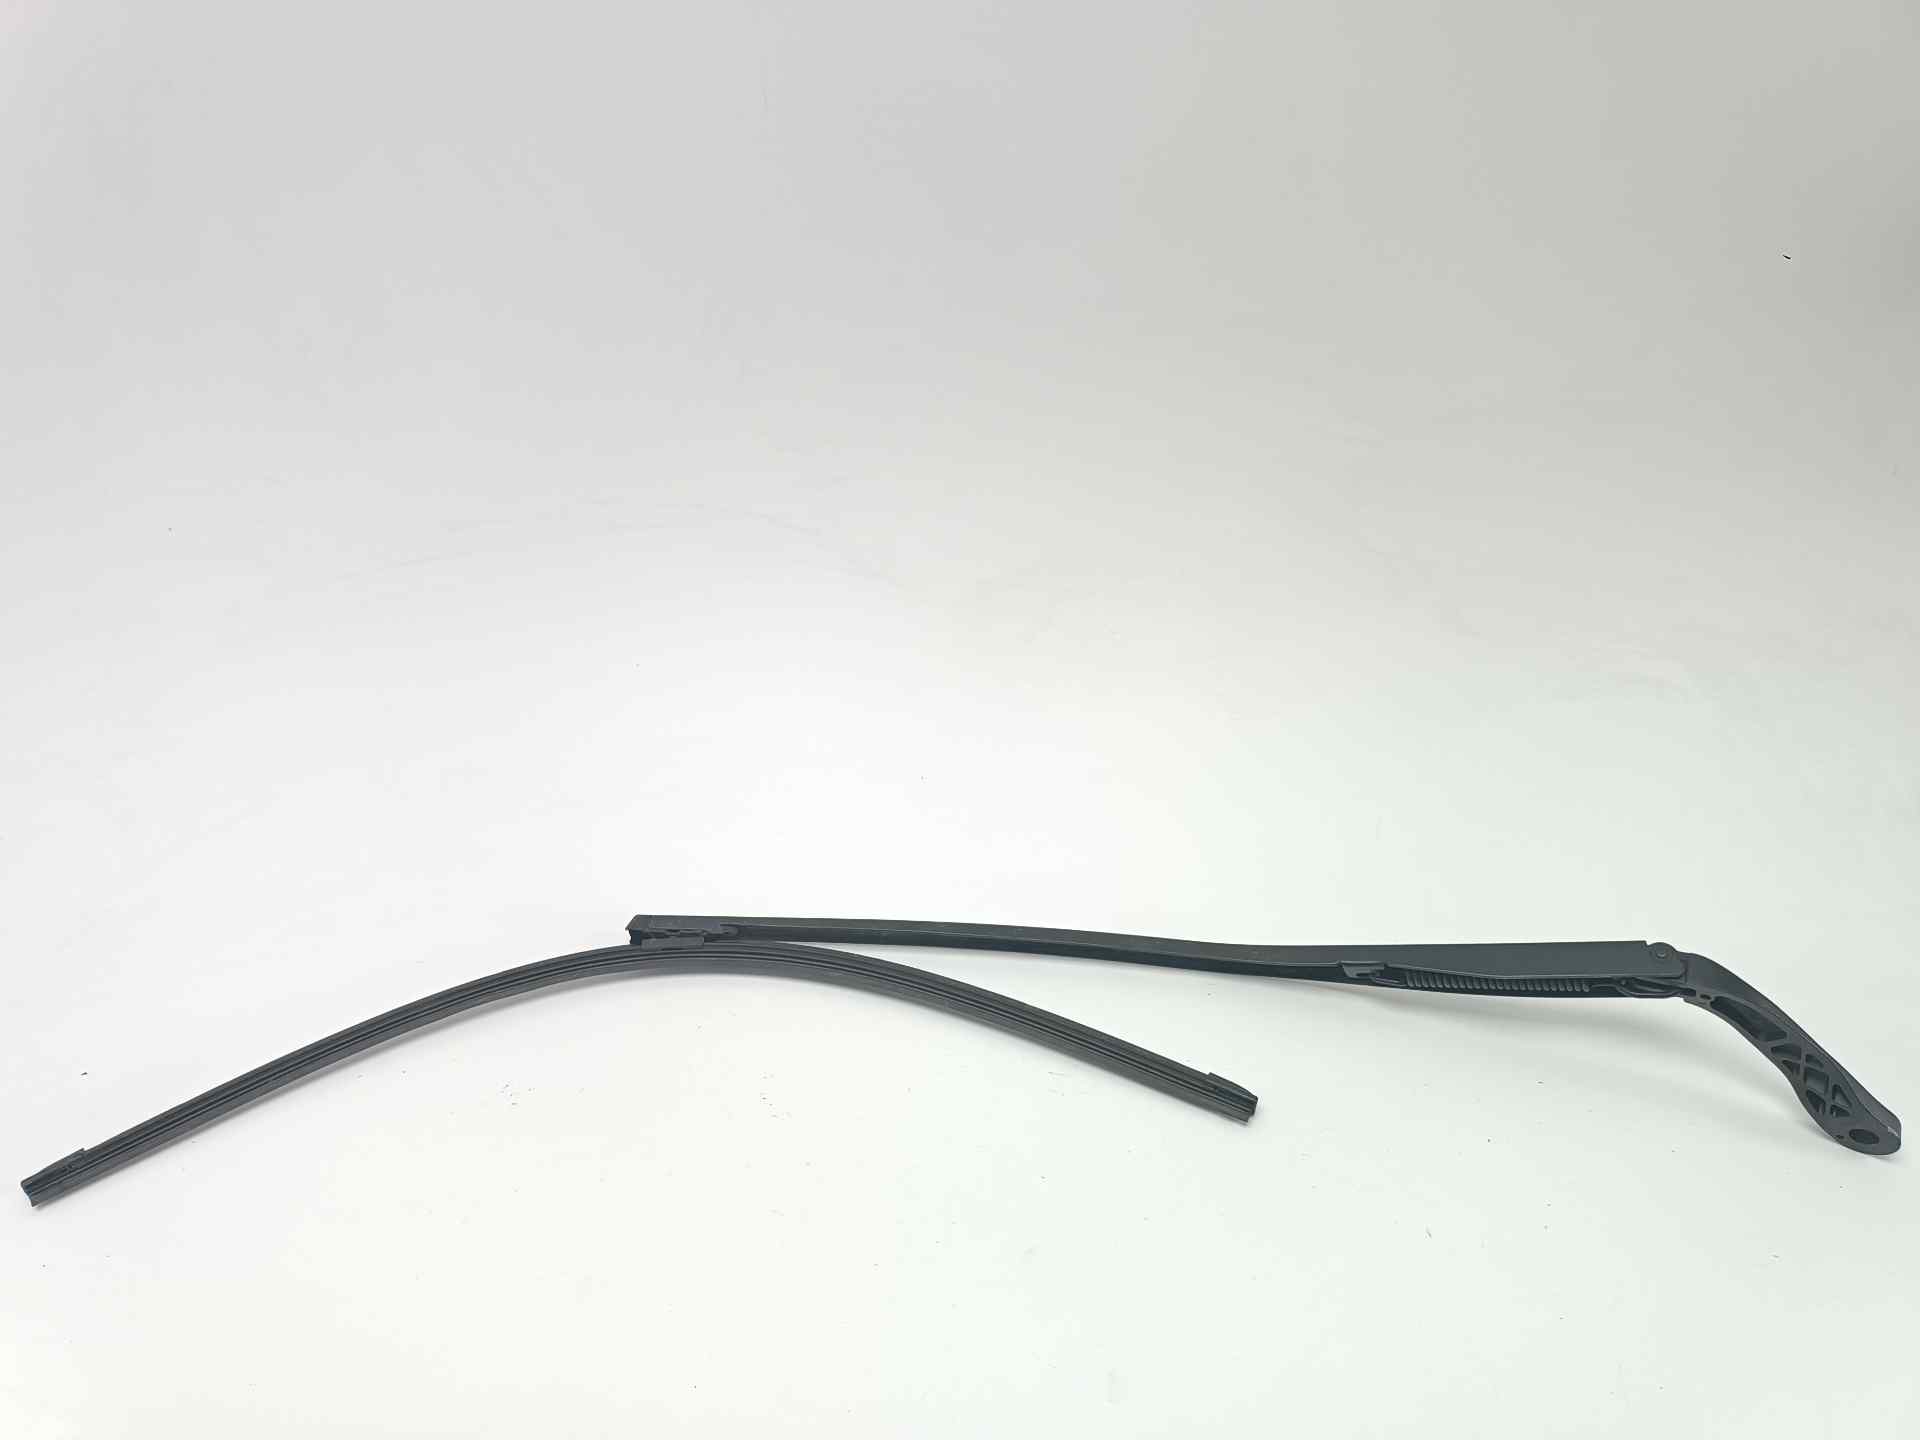 CITROËN C4 1 generation (2004-2011) Front Wiper Arms 9650103880, 9650103880, 14537 24583101